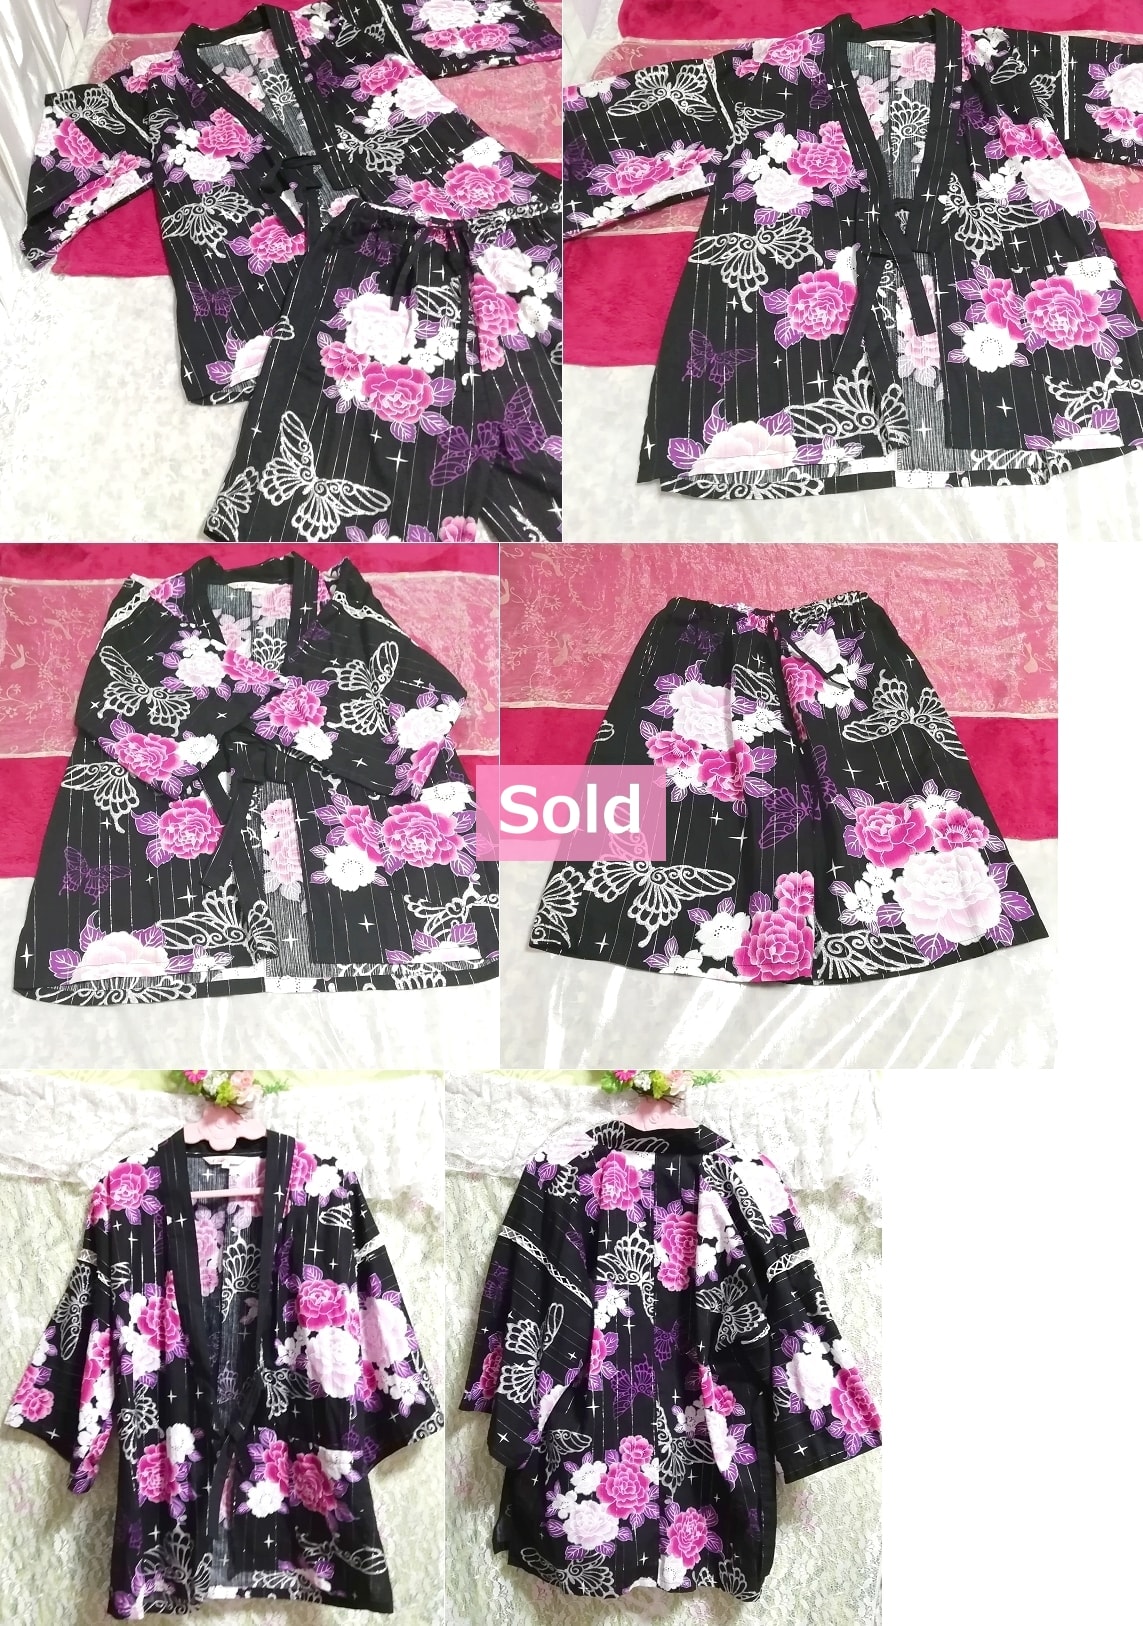 Black floral pattern rose and butterfly happi kimono haori and trousers 2 set Black floral pattern rose and butterfly happi kimono haori and trousers 2 set